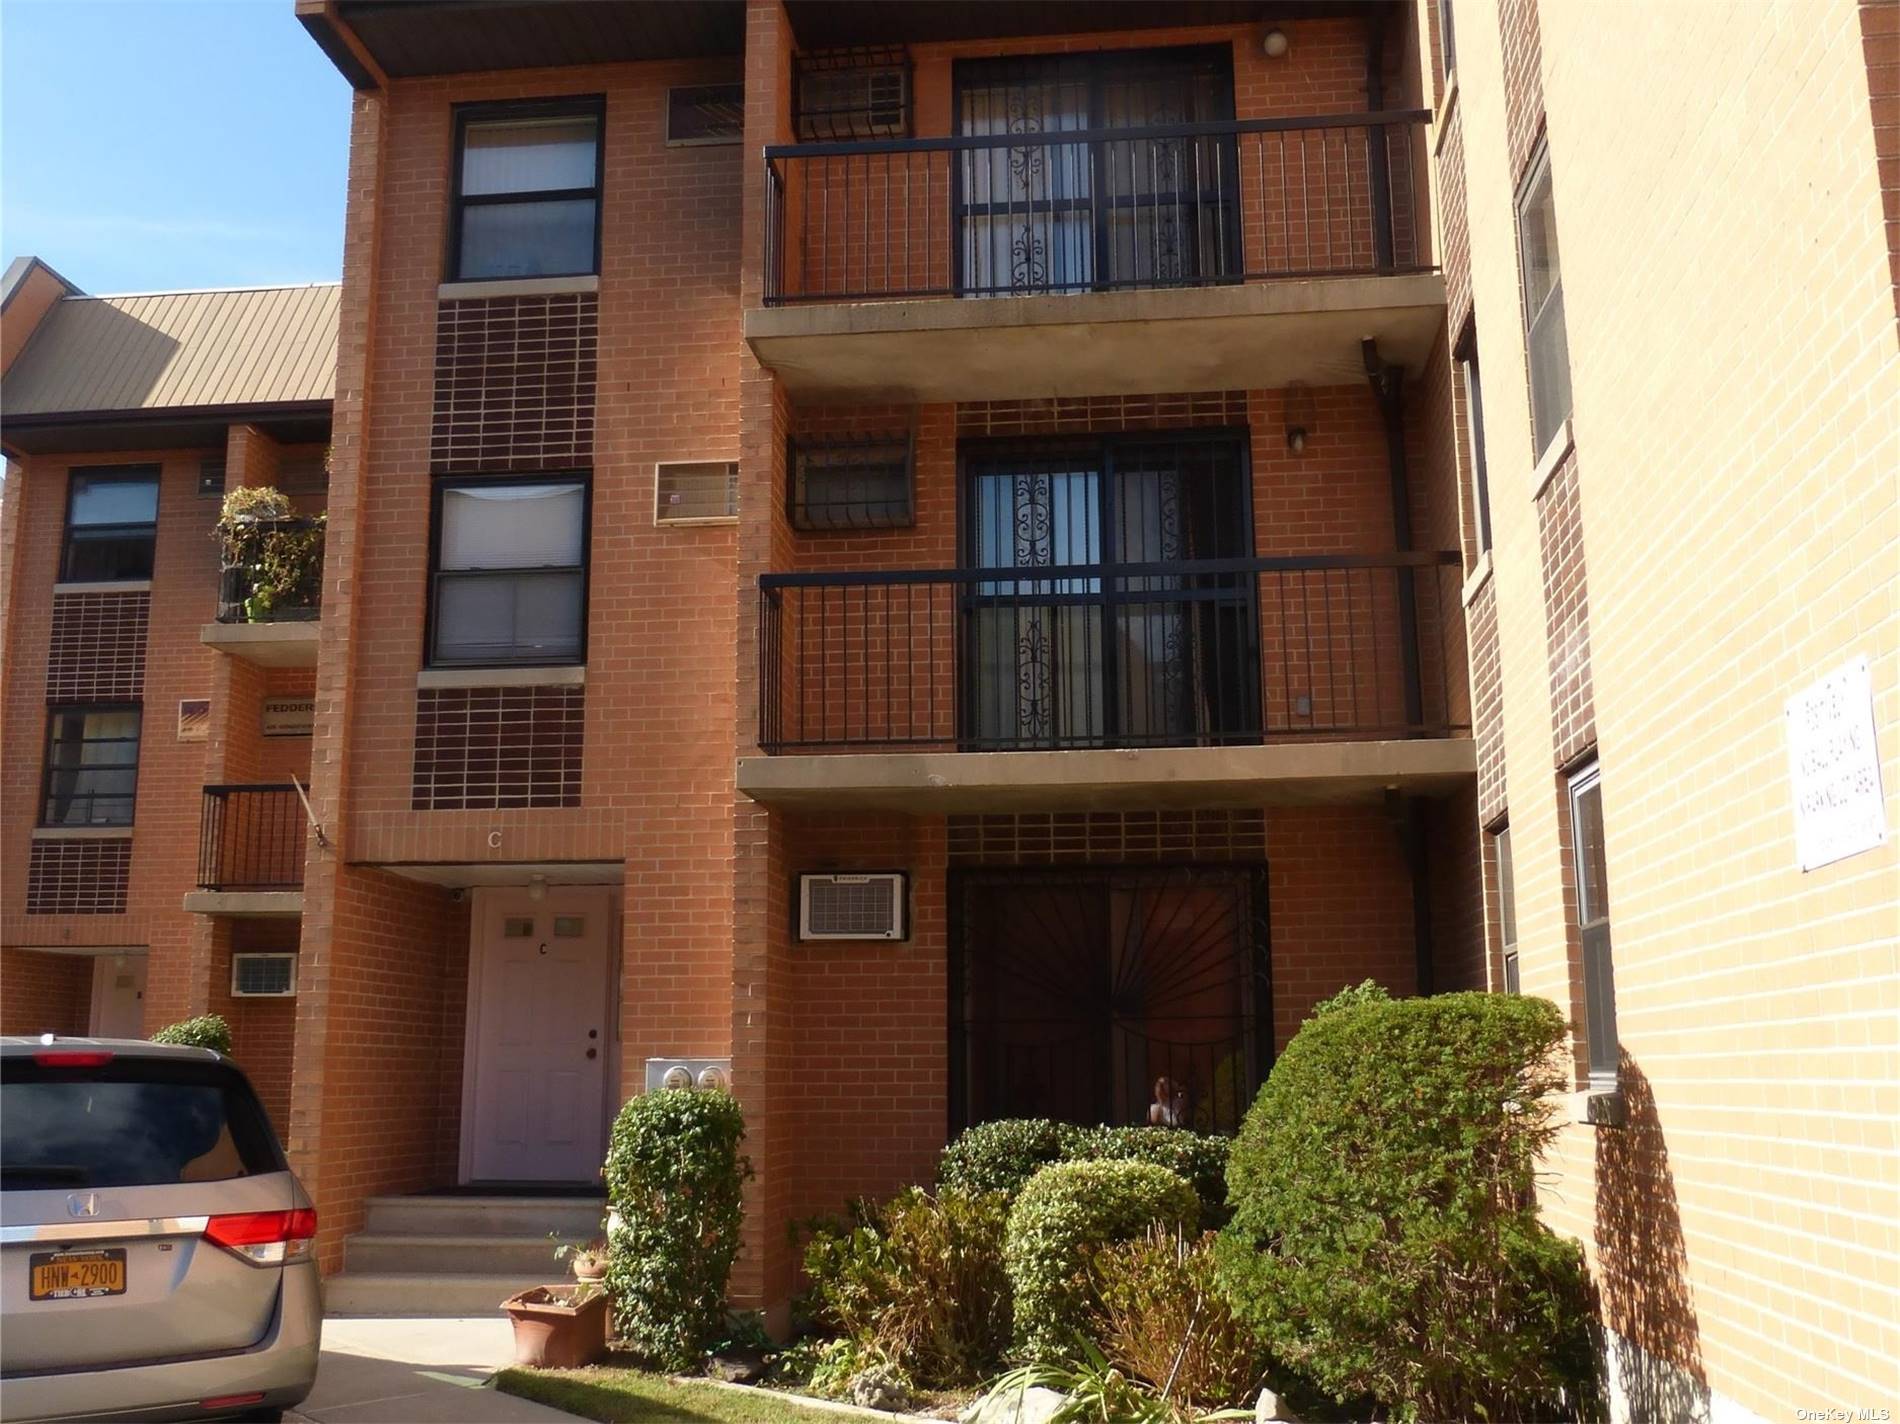 Apartment in Flushing - Parsons  Queens, NY 11366